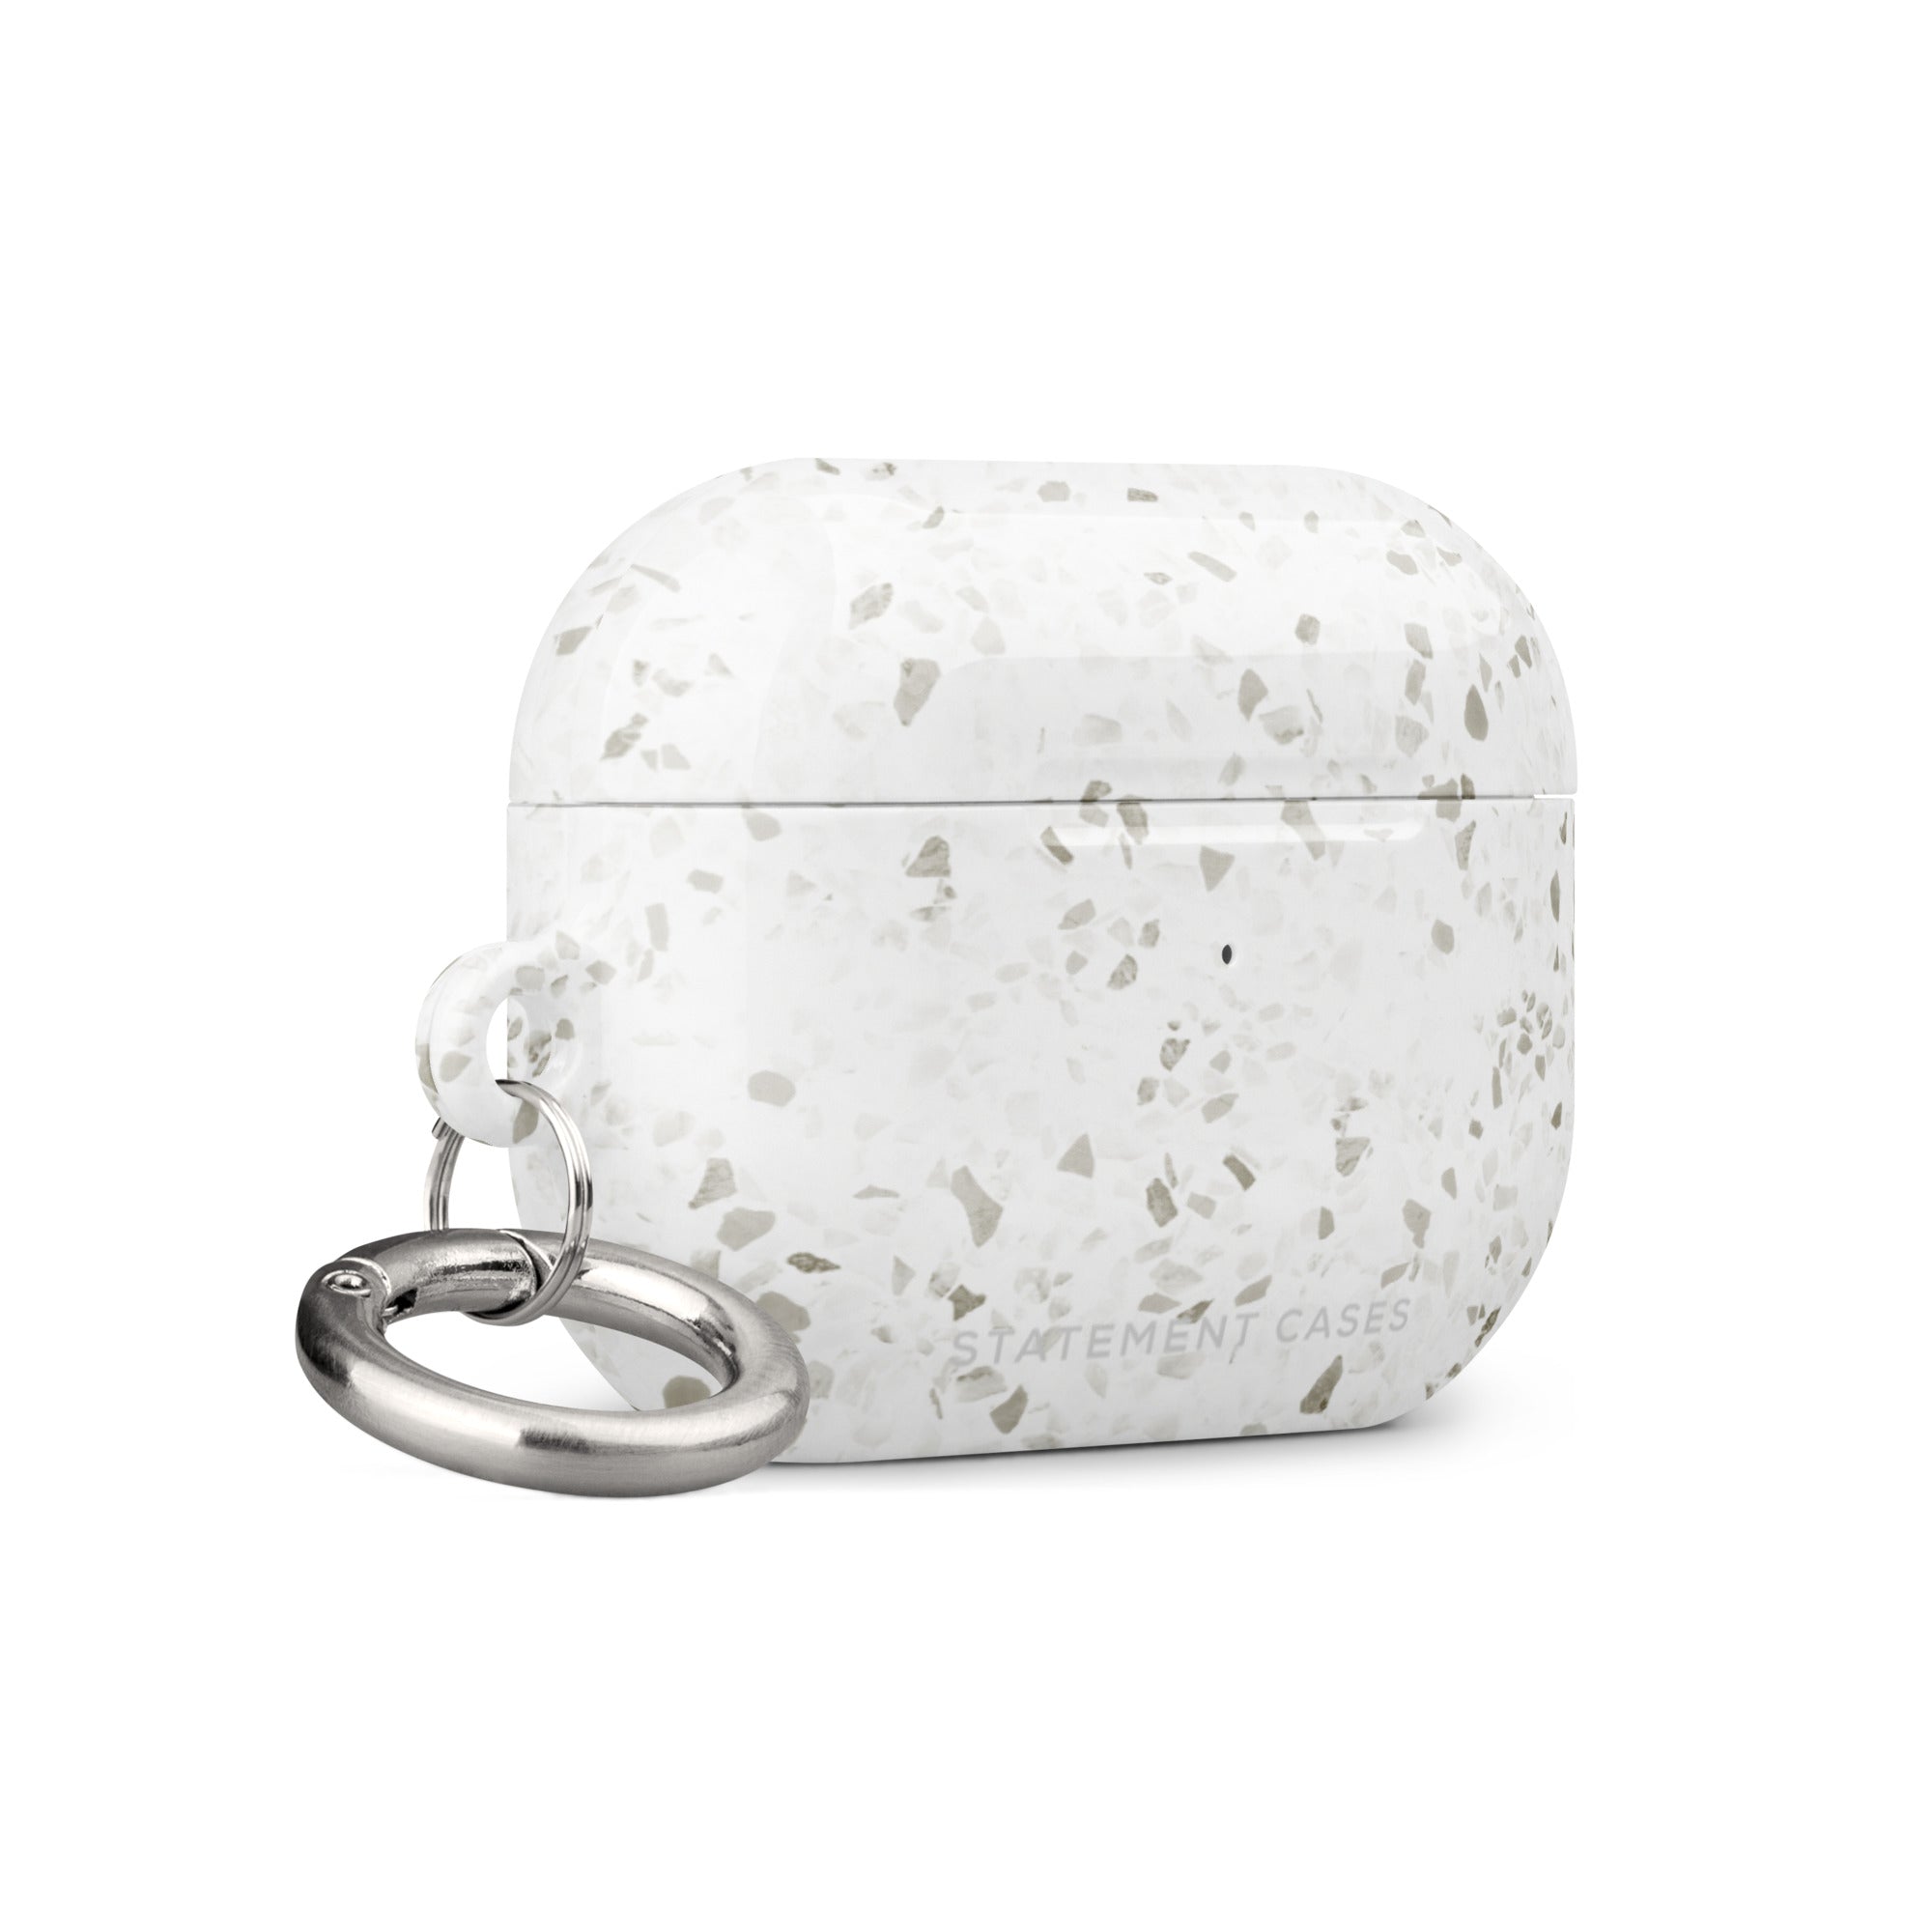 A white, speckled terrazzo-patterned Terrazzo Chic for AirPods Pro Gen 2 case featuring a built-in metal carabiner for easy attachment. The impact-absorbing design ensures maximum protection, and the brand name "Statement Cases" is elegantly displayed on the bottom front.